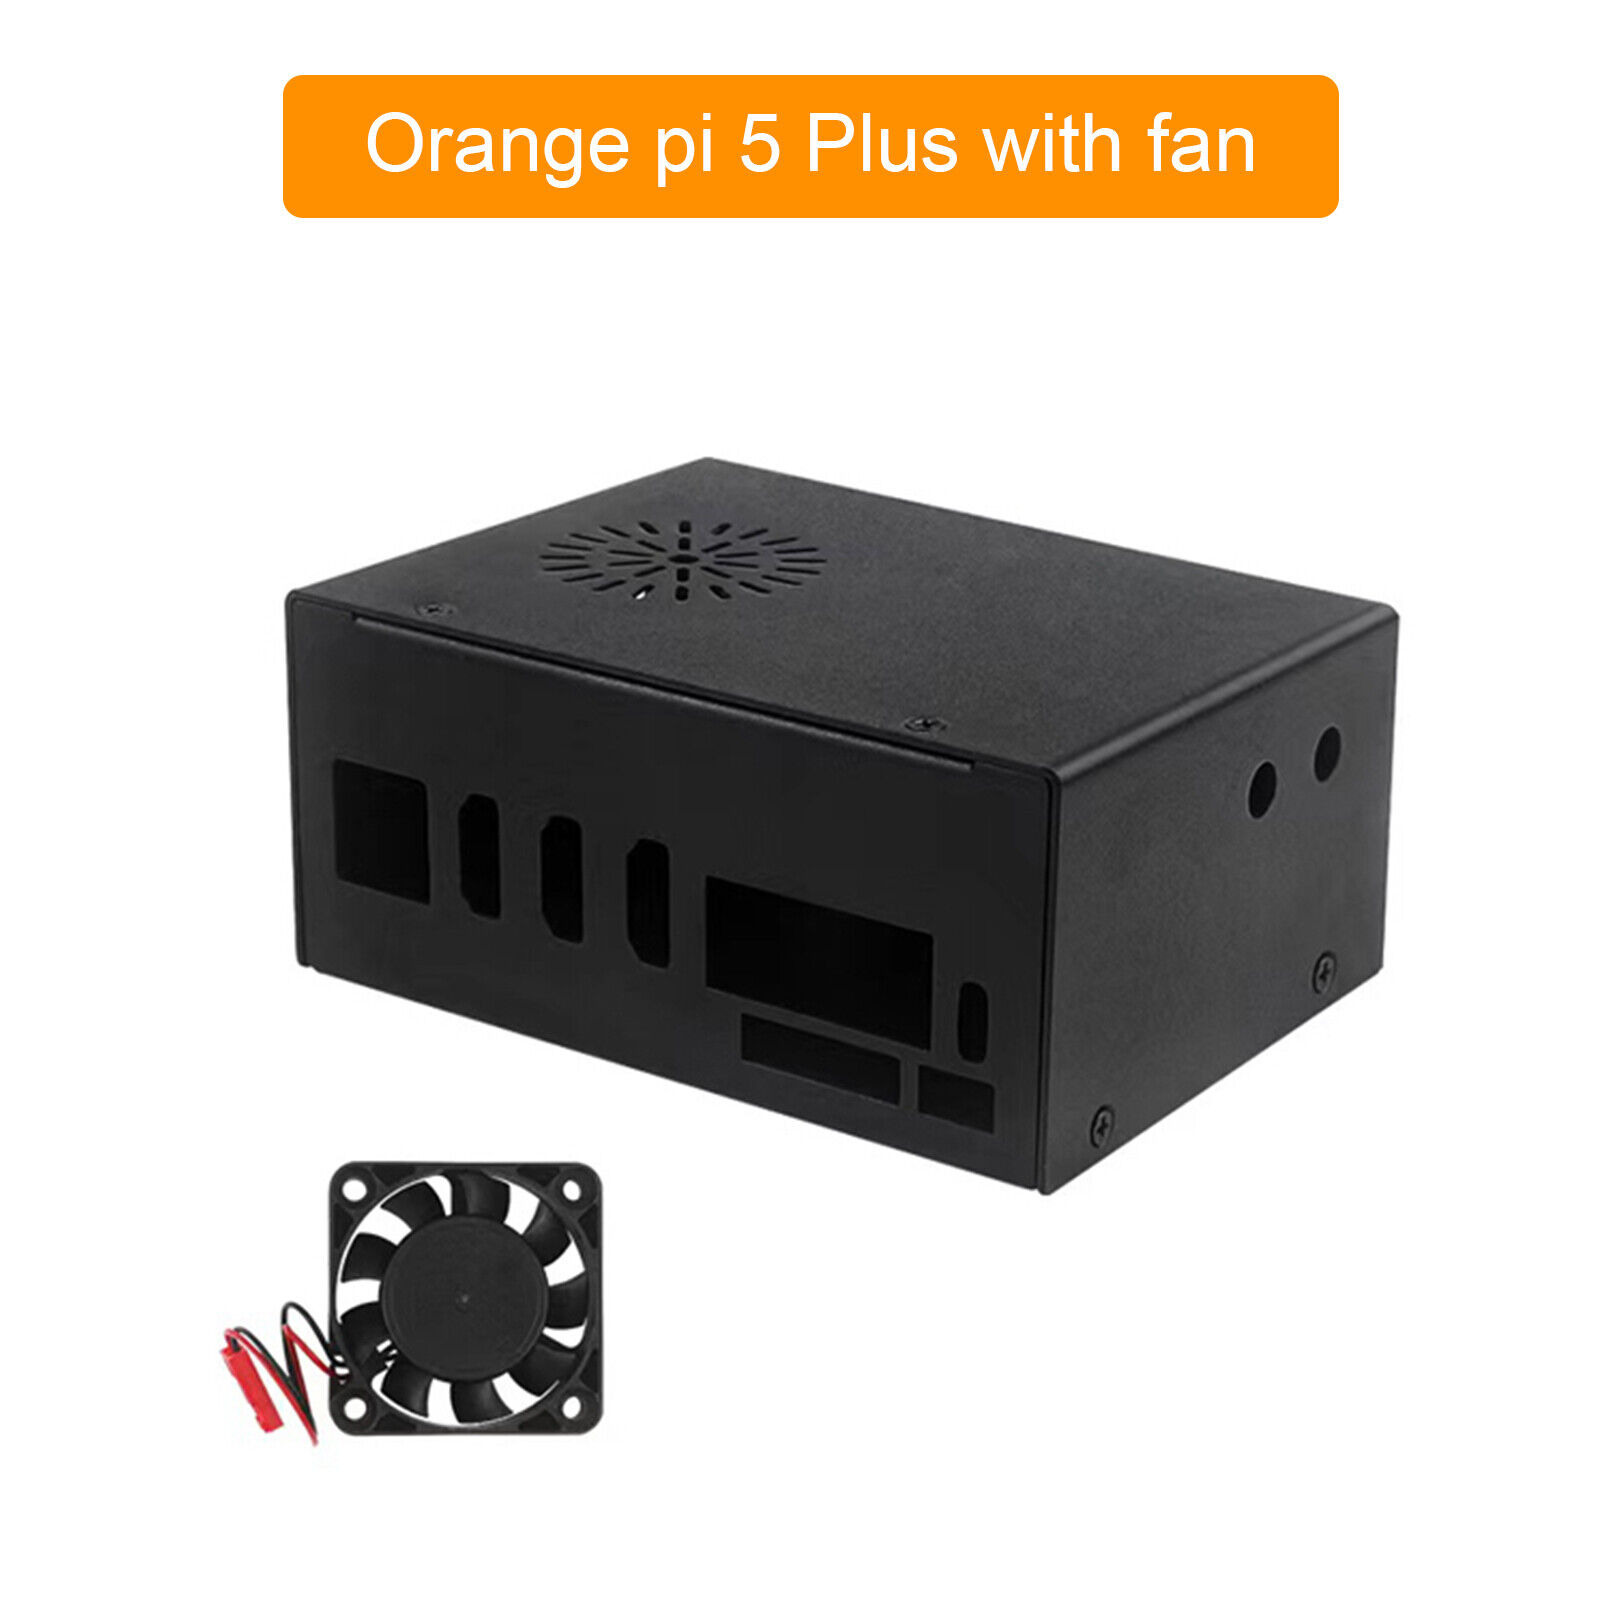 Fit for Orange pi 5 Plus metal cooling case with fan and external antenna WIFI